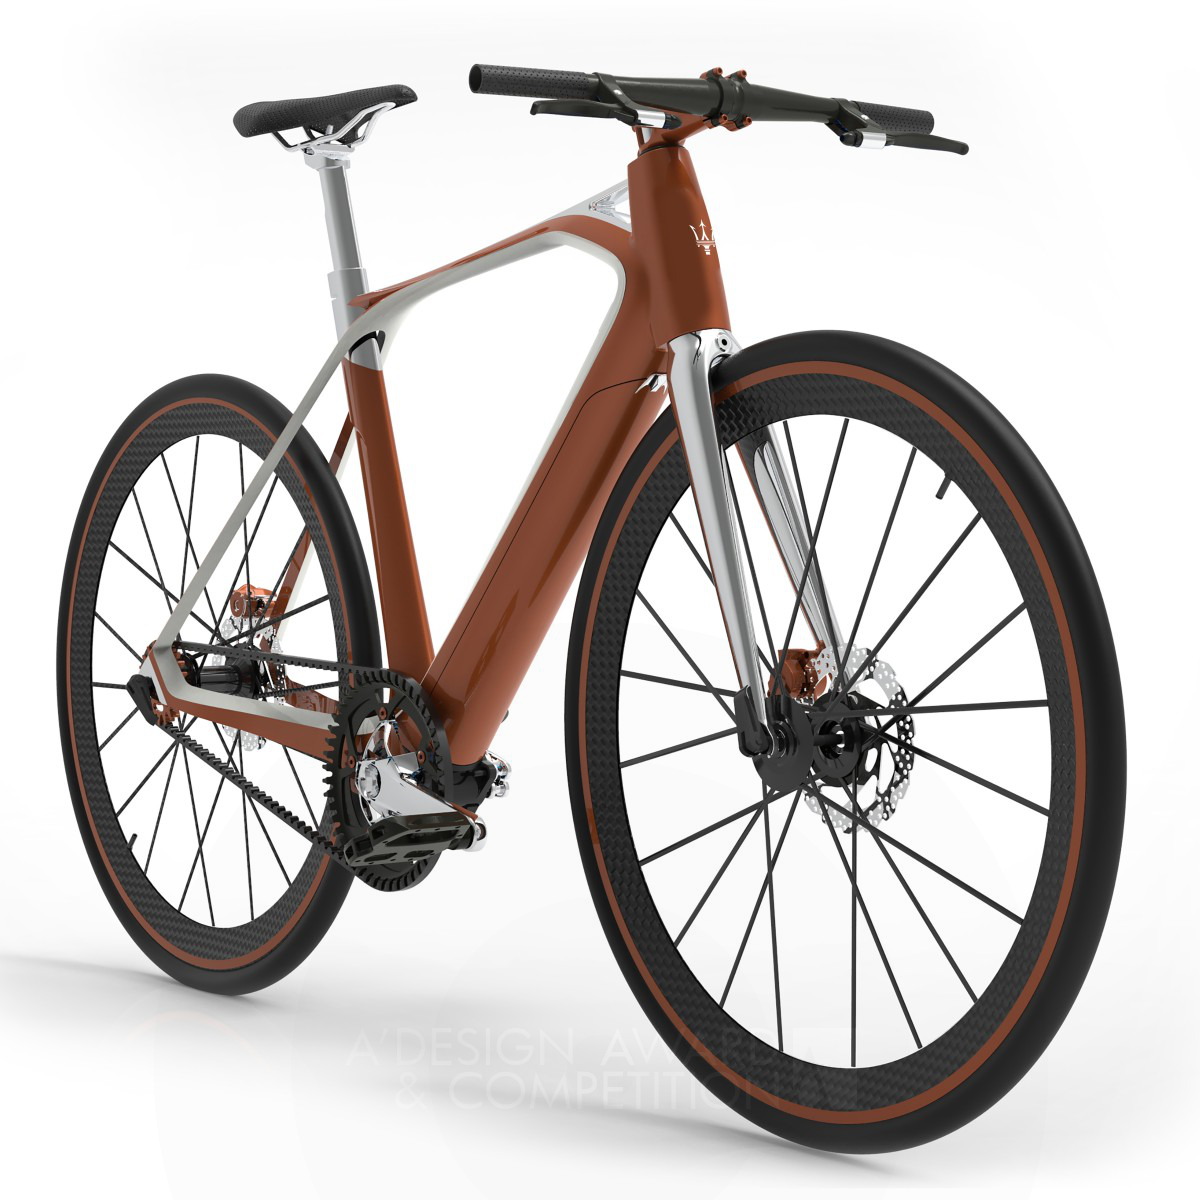 2020 Electric Bike Electric sports bike by Diavelo Golden Vehicle, Mobility and Transportation Design Award Winner 2018 